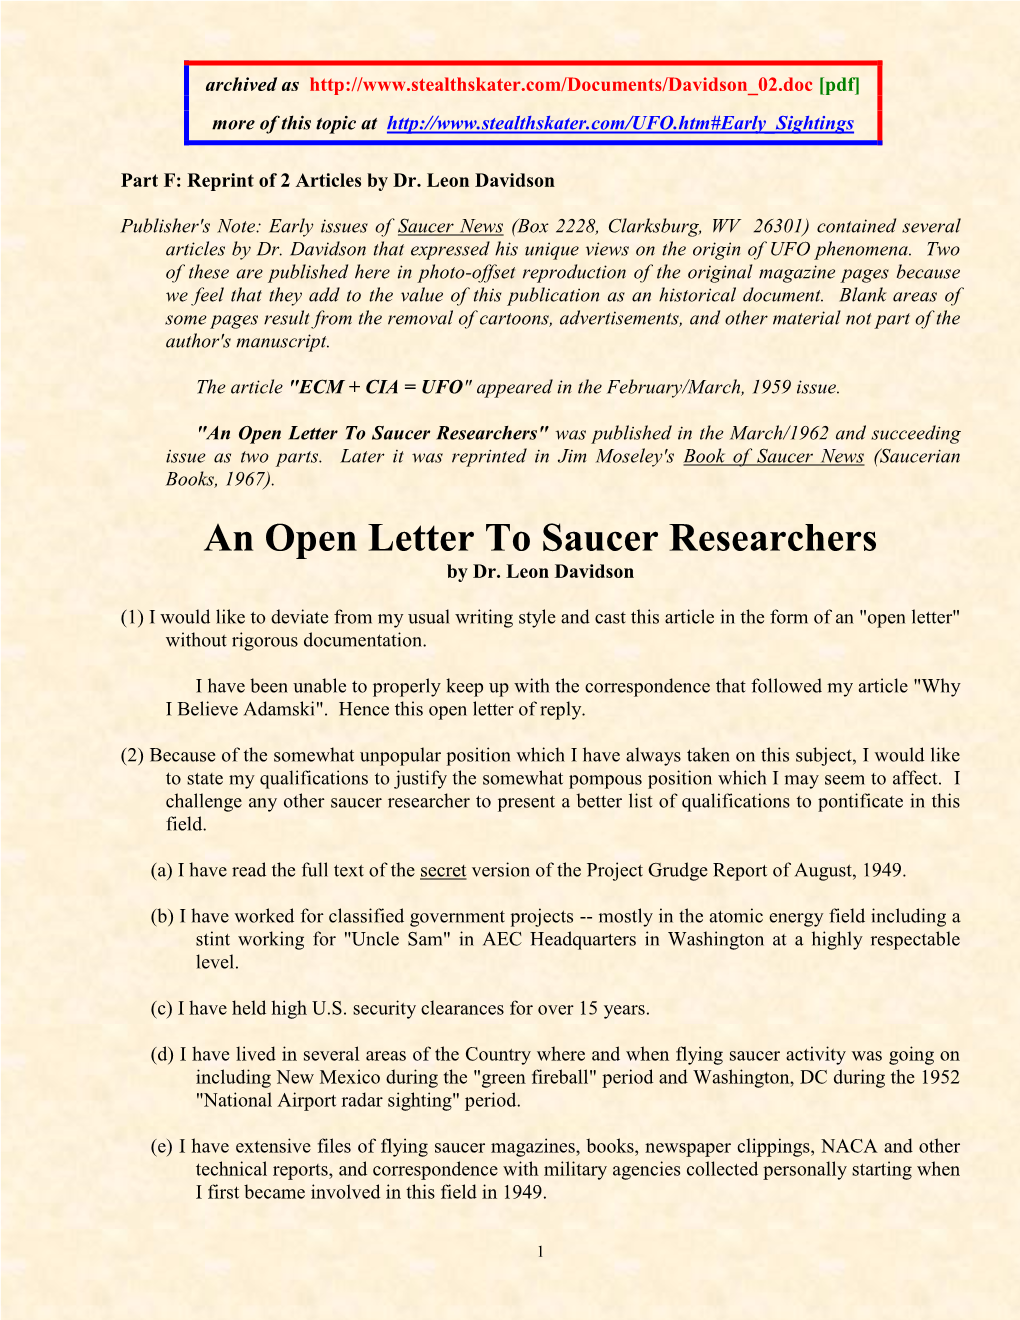 An Open Letter to Saucer Researchers" Was Published in the March/1962 and Succeeding Issue As Two Parts